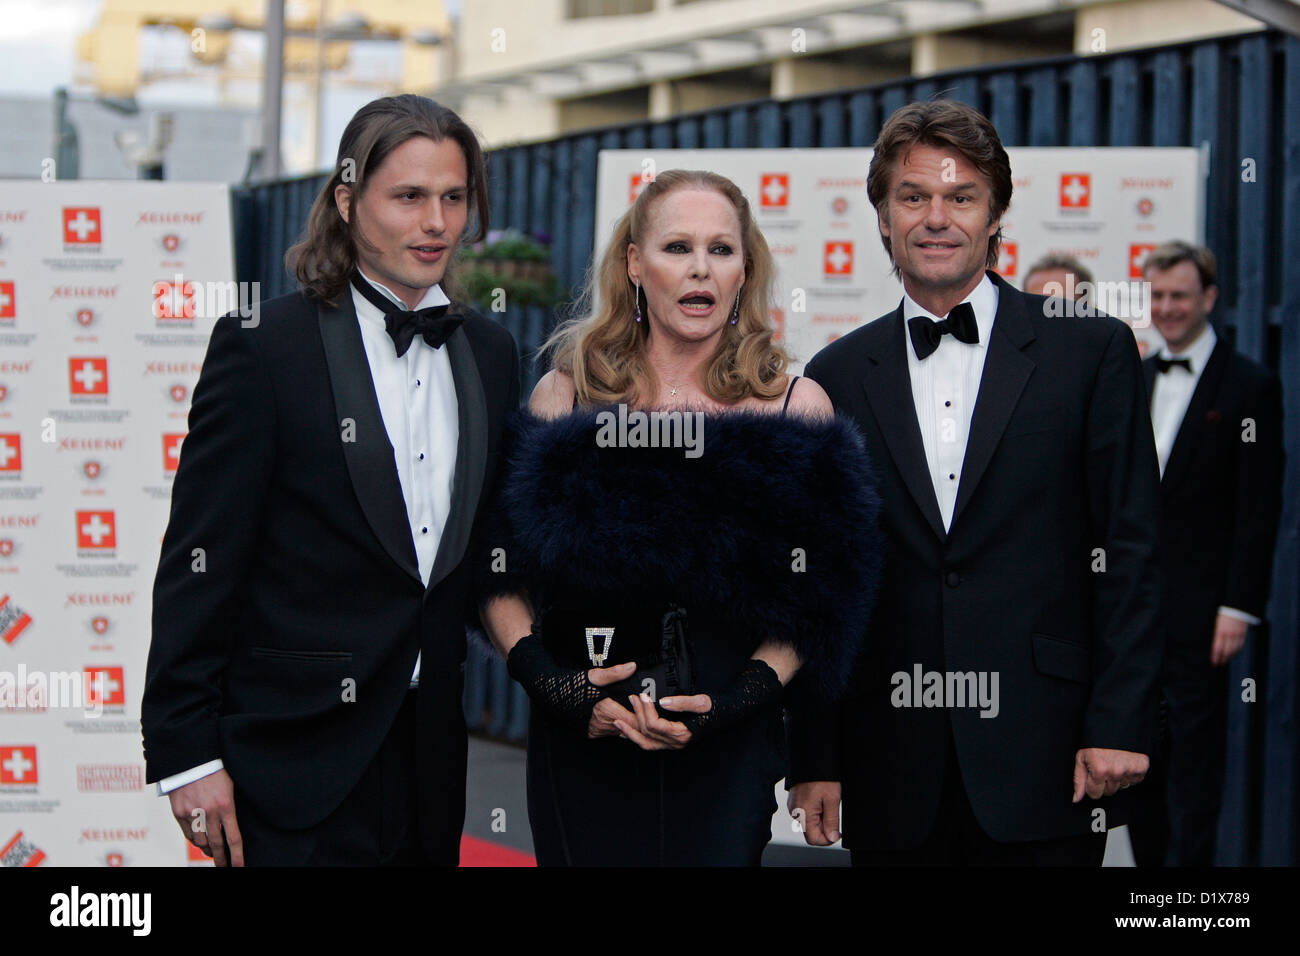 Ursula Andress with Harry Hamlin and their son, actor Dimitri Hamlin attend an event to celebrate her 70th birthday. Stock Photo